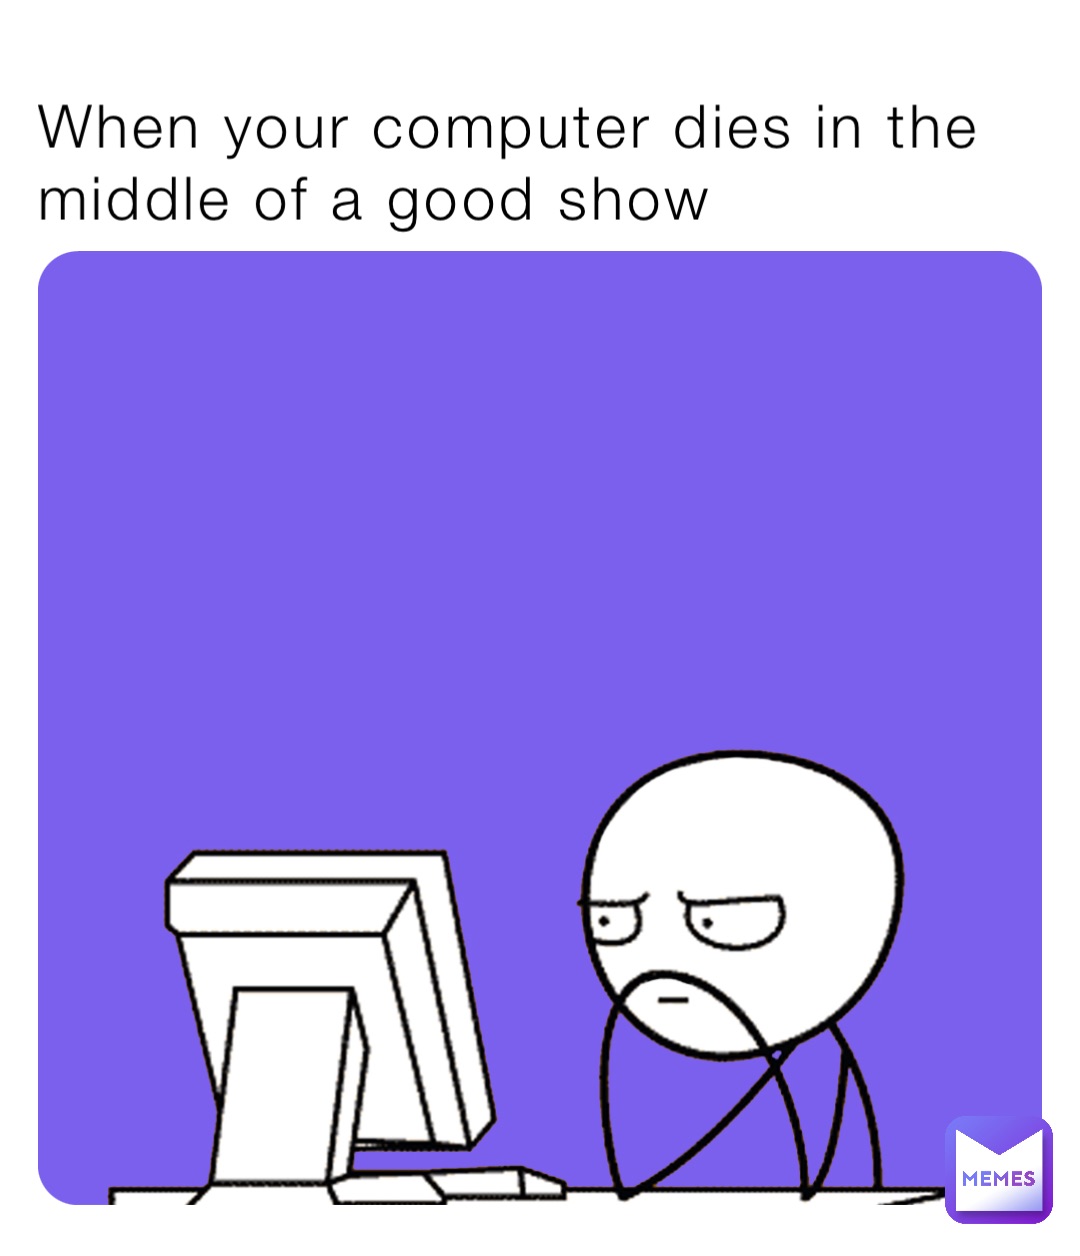 When your computer dies in the middle of a good show